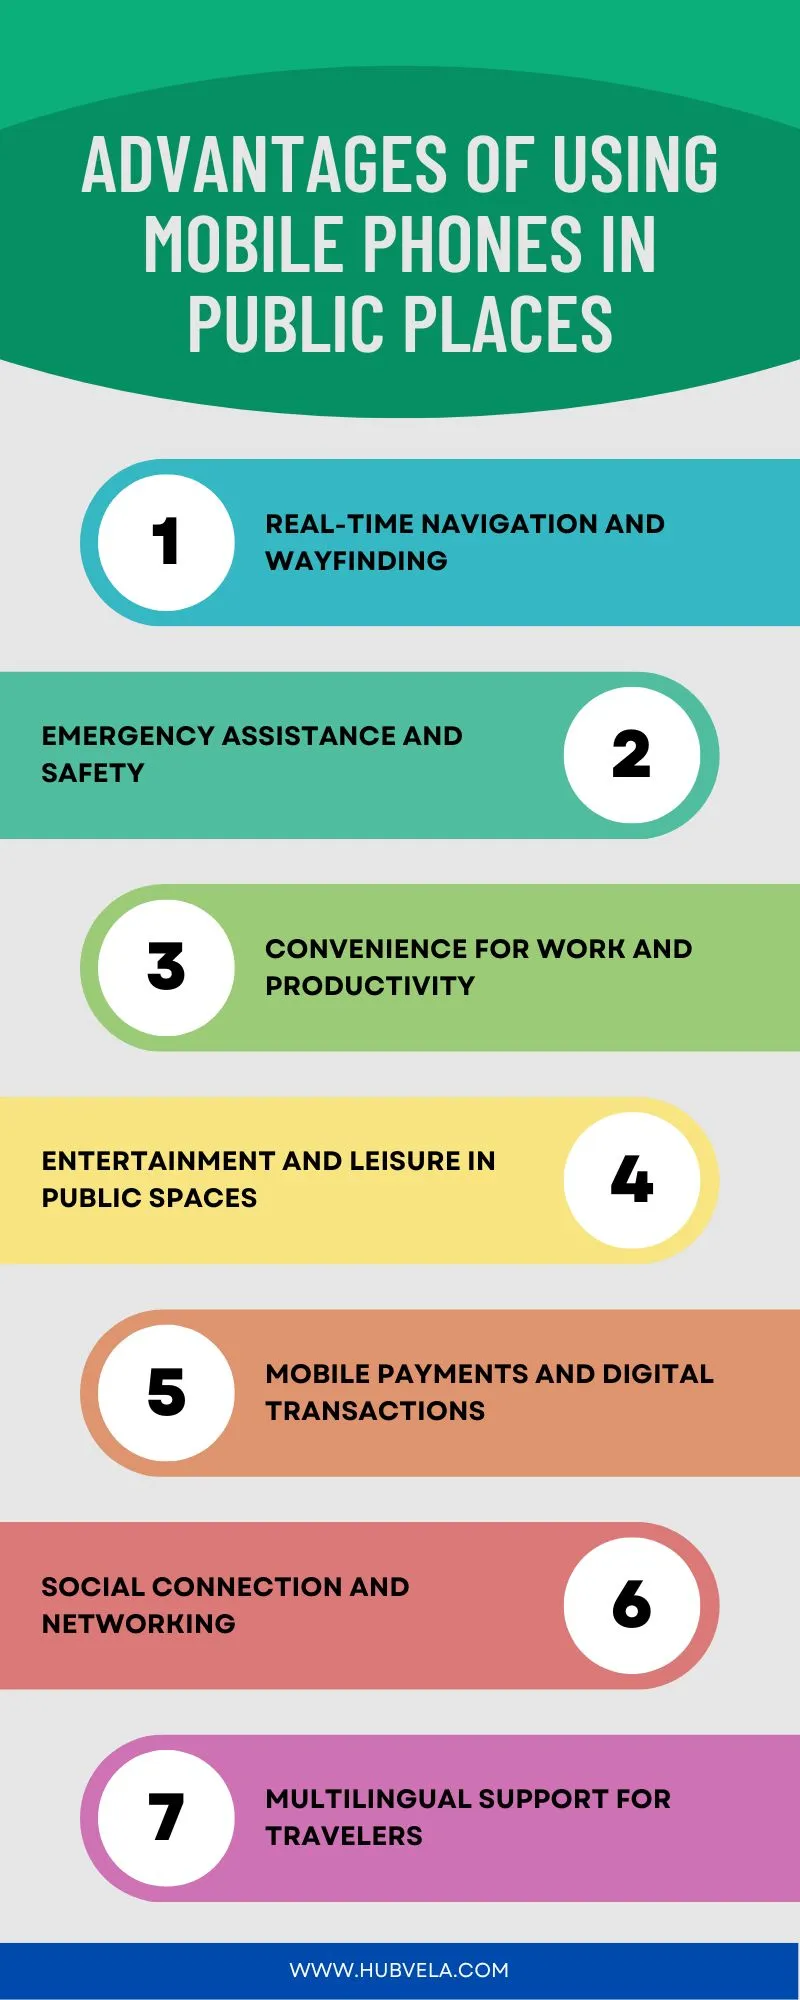 Advantages of Using Mobile Phones in Public Places Infographic